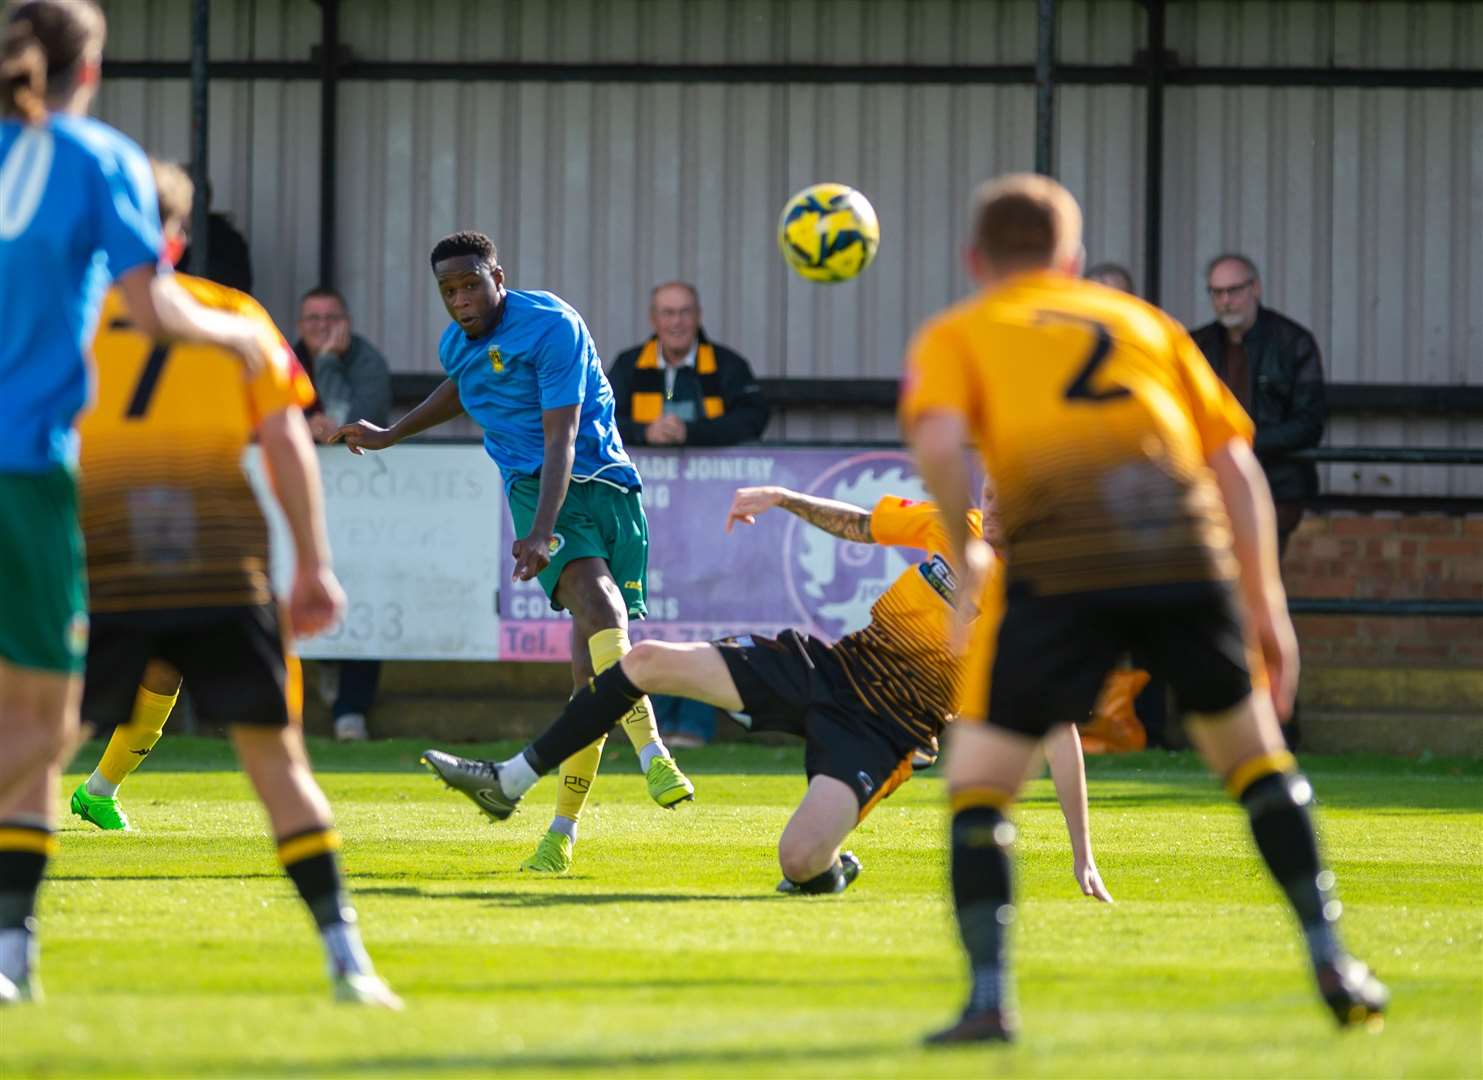 Omarr Lawson scores on his Ashford debut in the win at Littlehampton. Picture: Ian Scammell